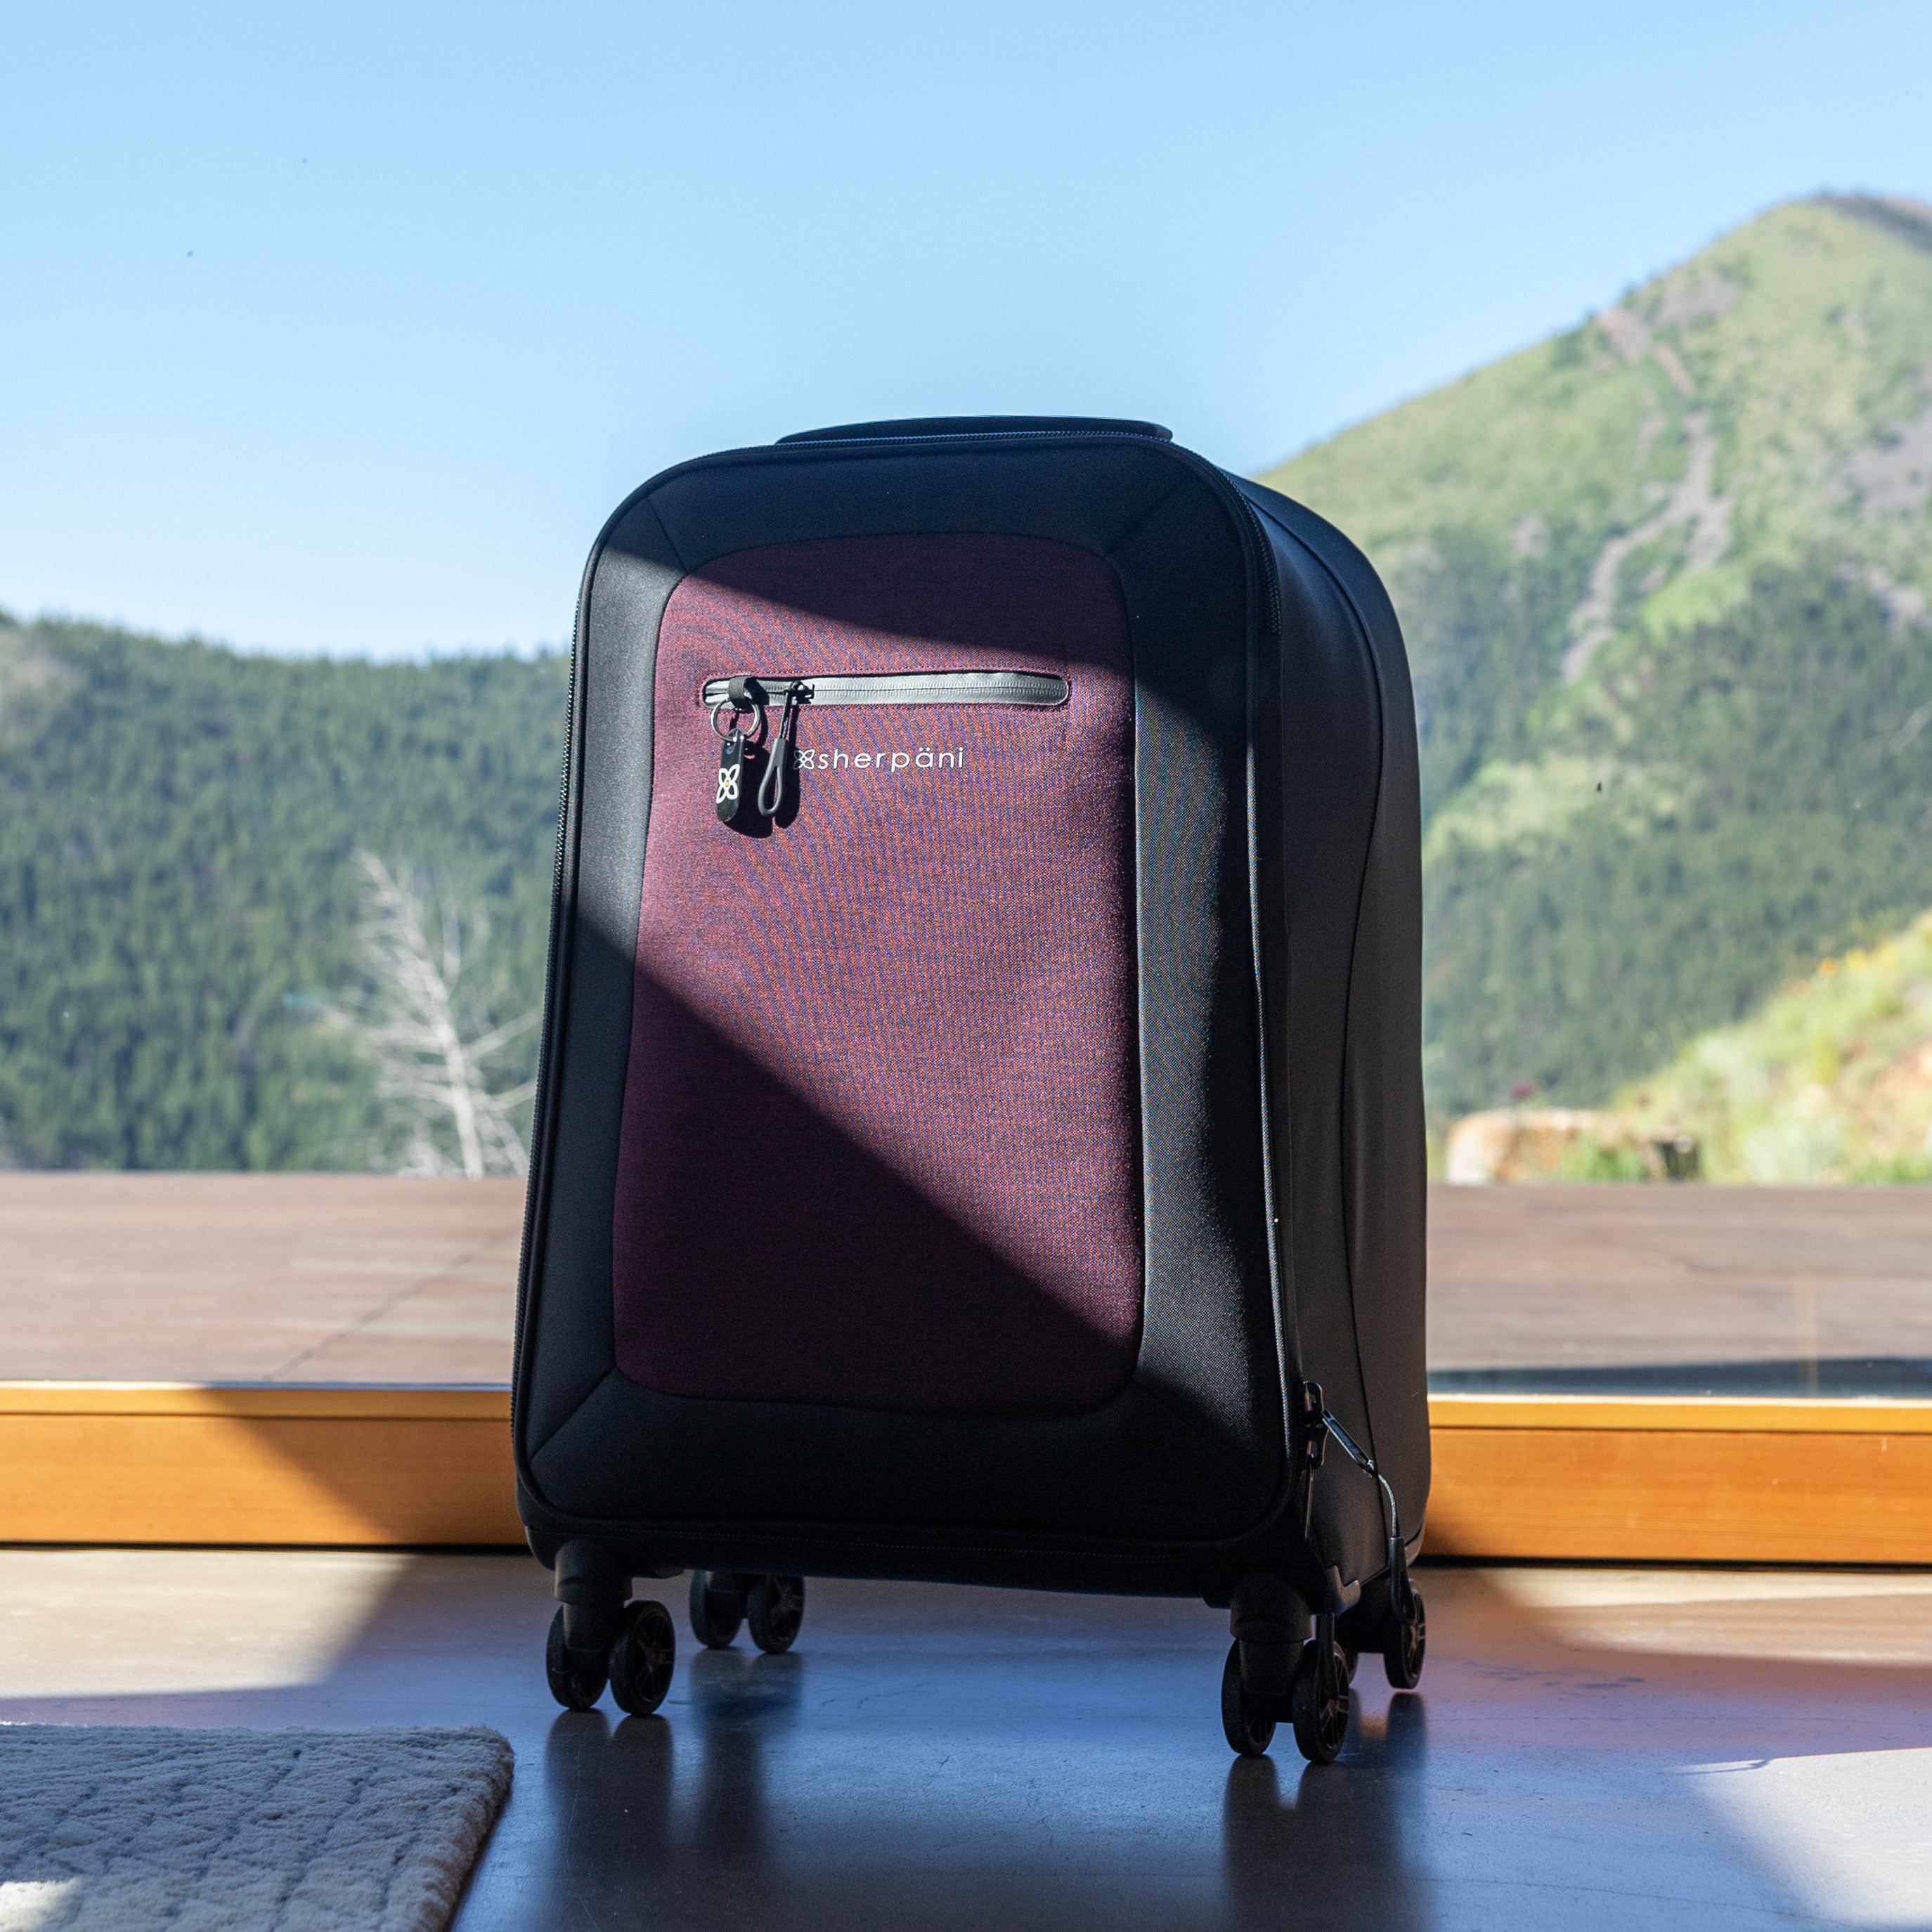 Sherpani soft-shell carry-on luggage, the Latitude in Merlot, sits in front of a window looking out over a scenic mountain view.